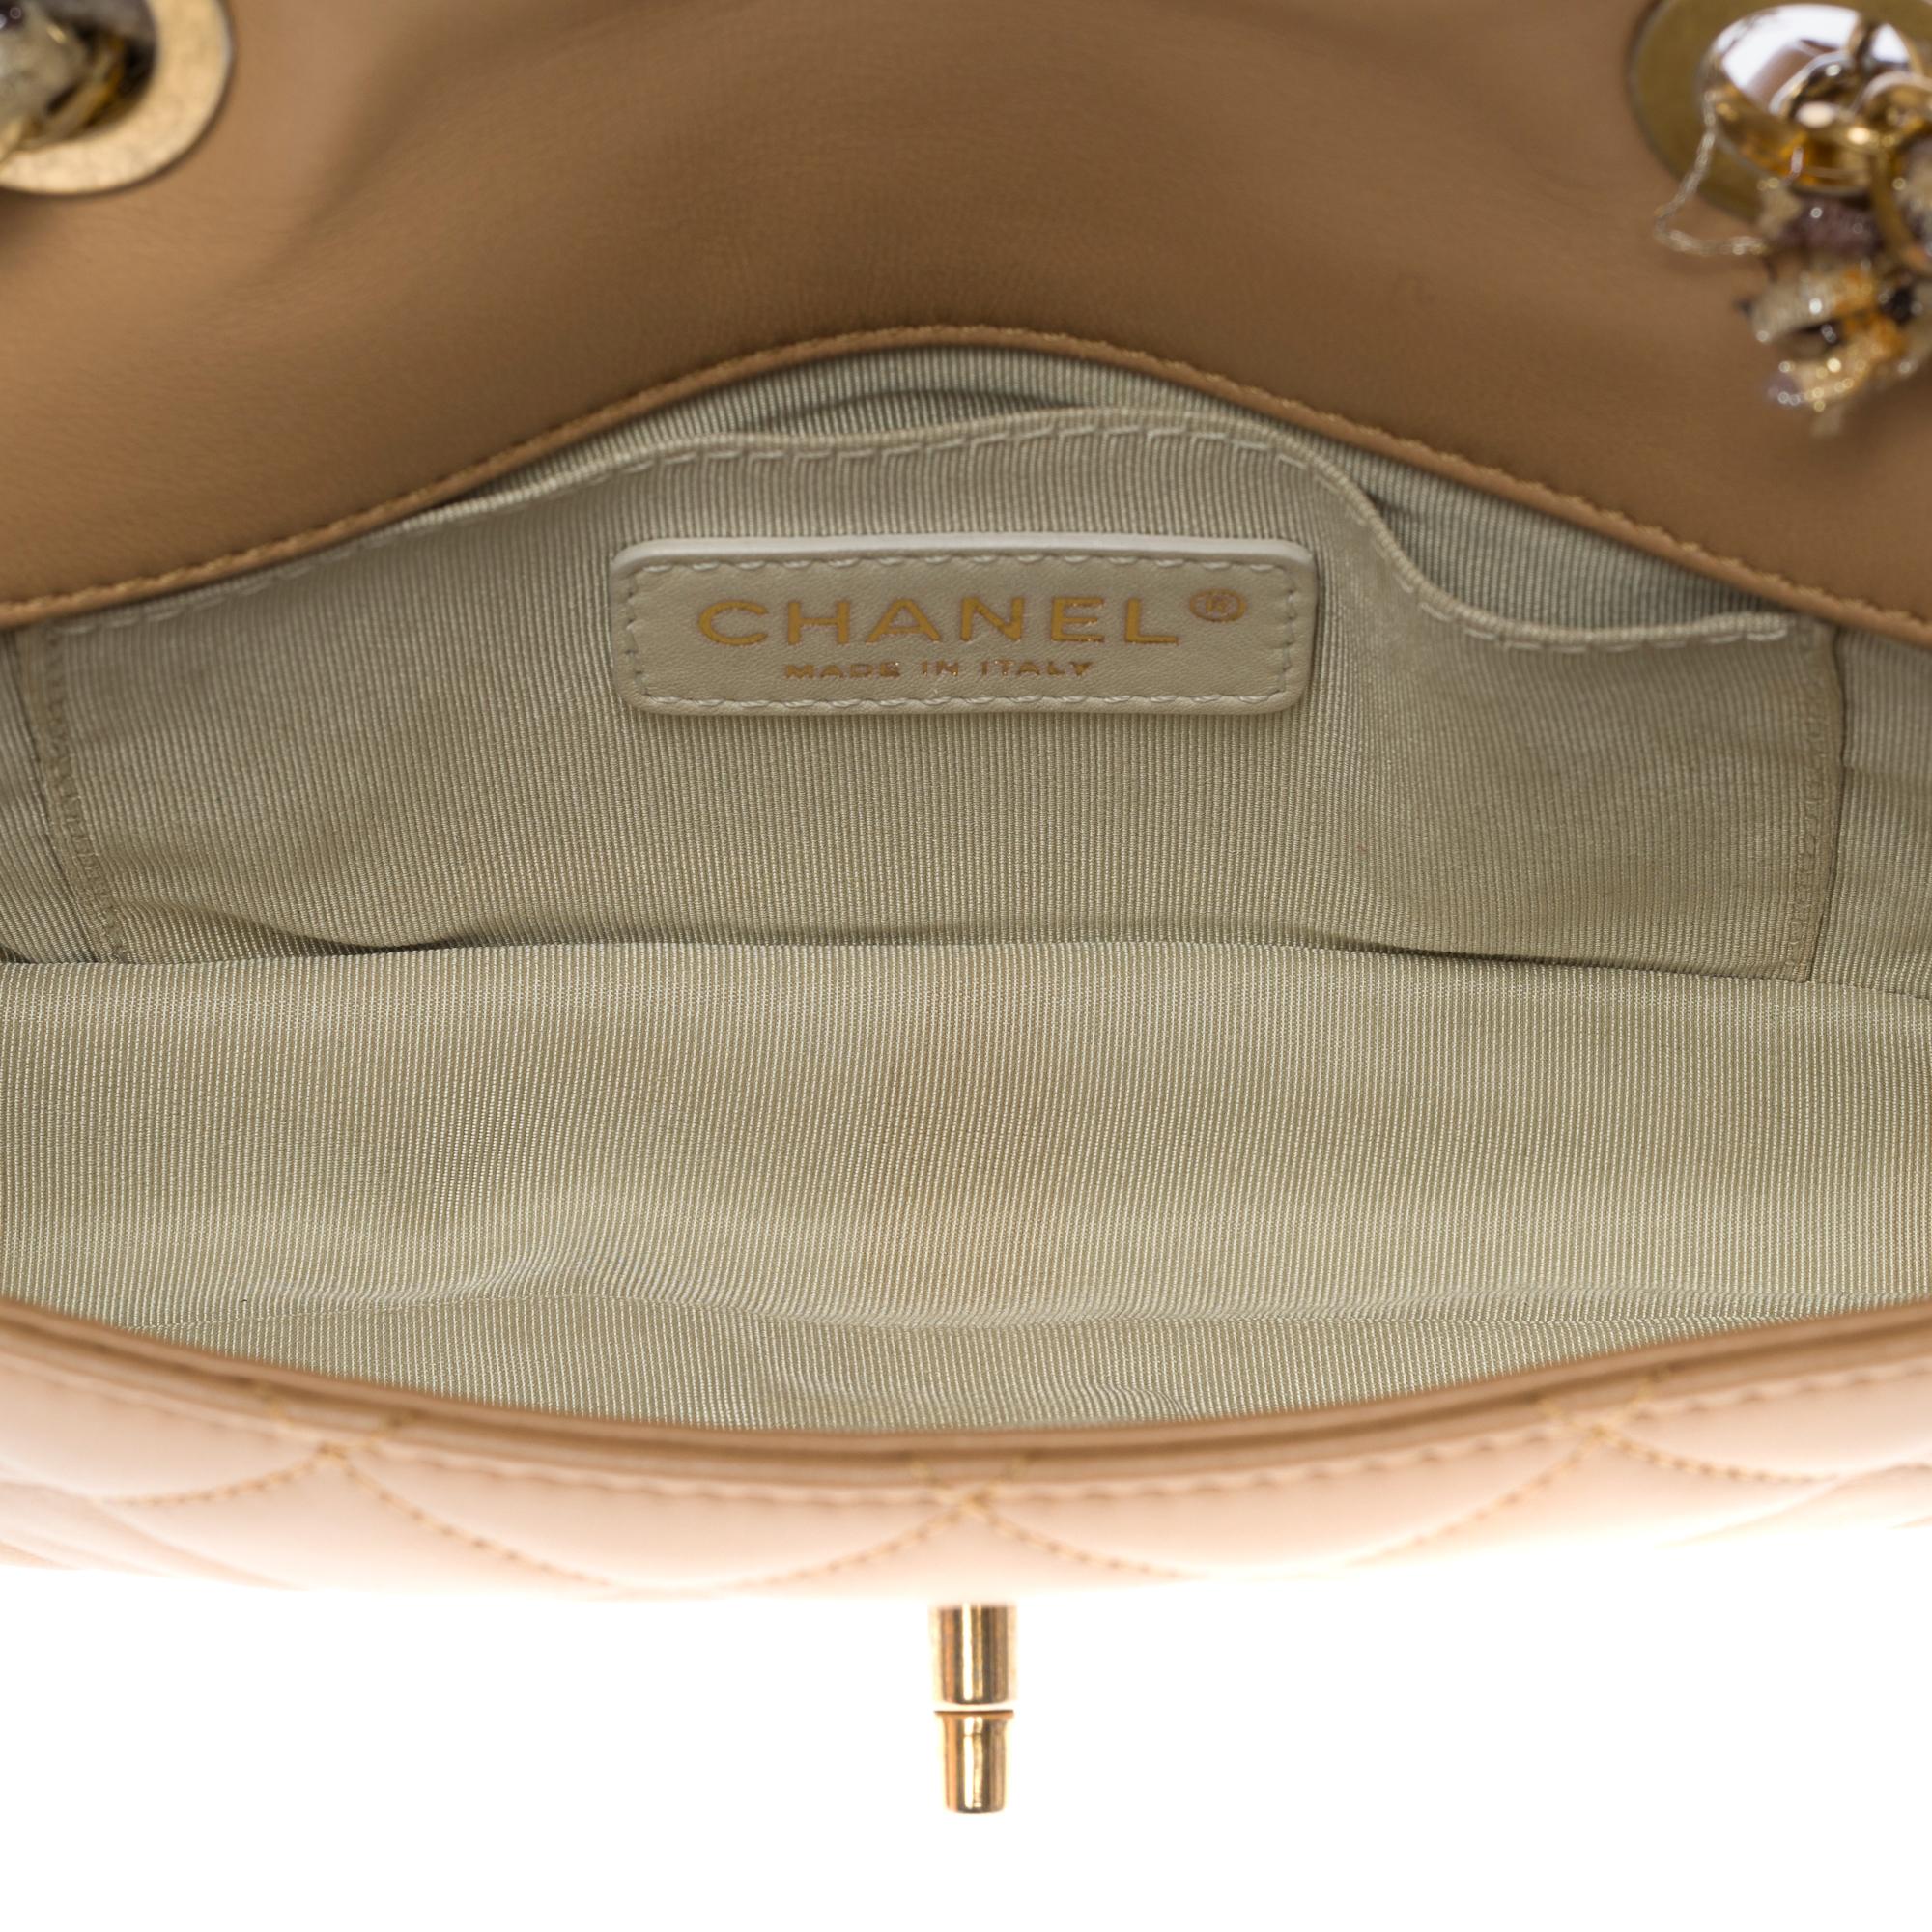 Rare limited edition Chanel Full flap shoulder bag in beige quilted lambskin, GHW For Sale 4